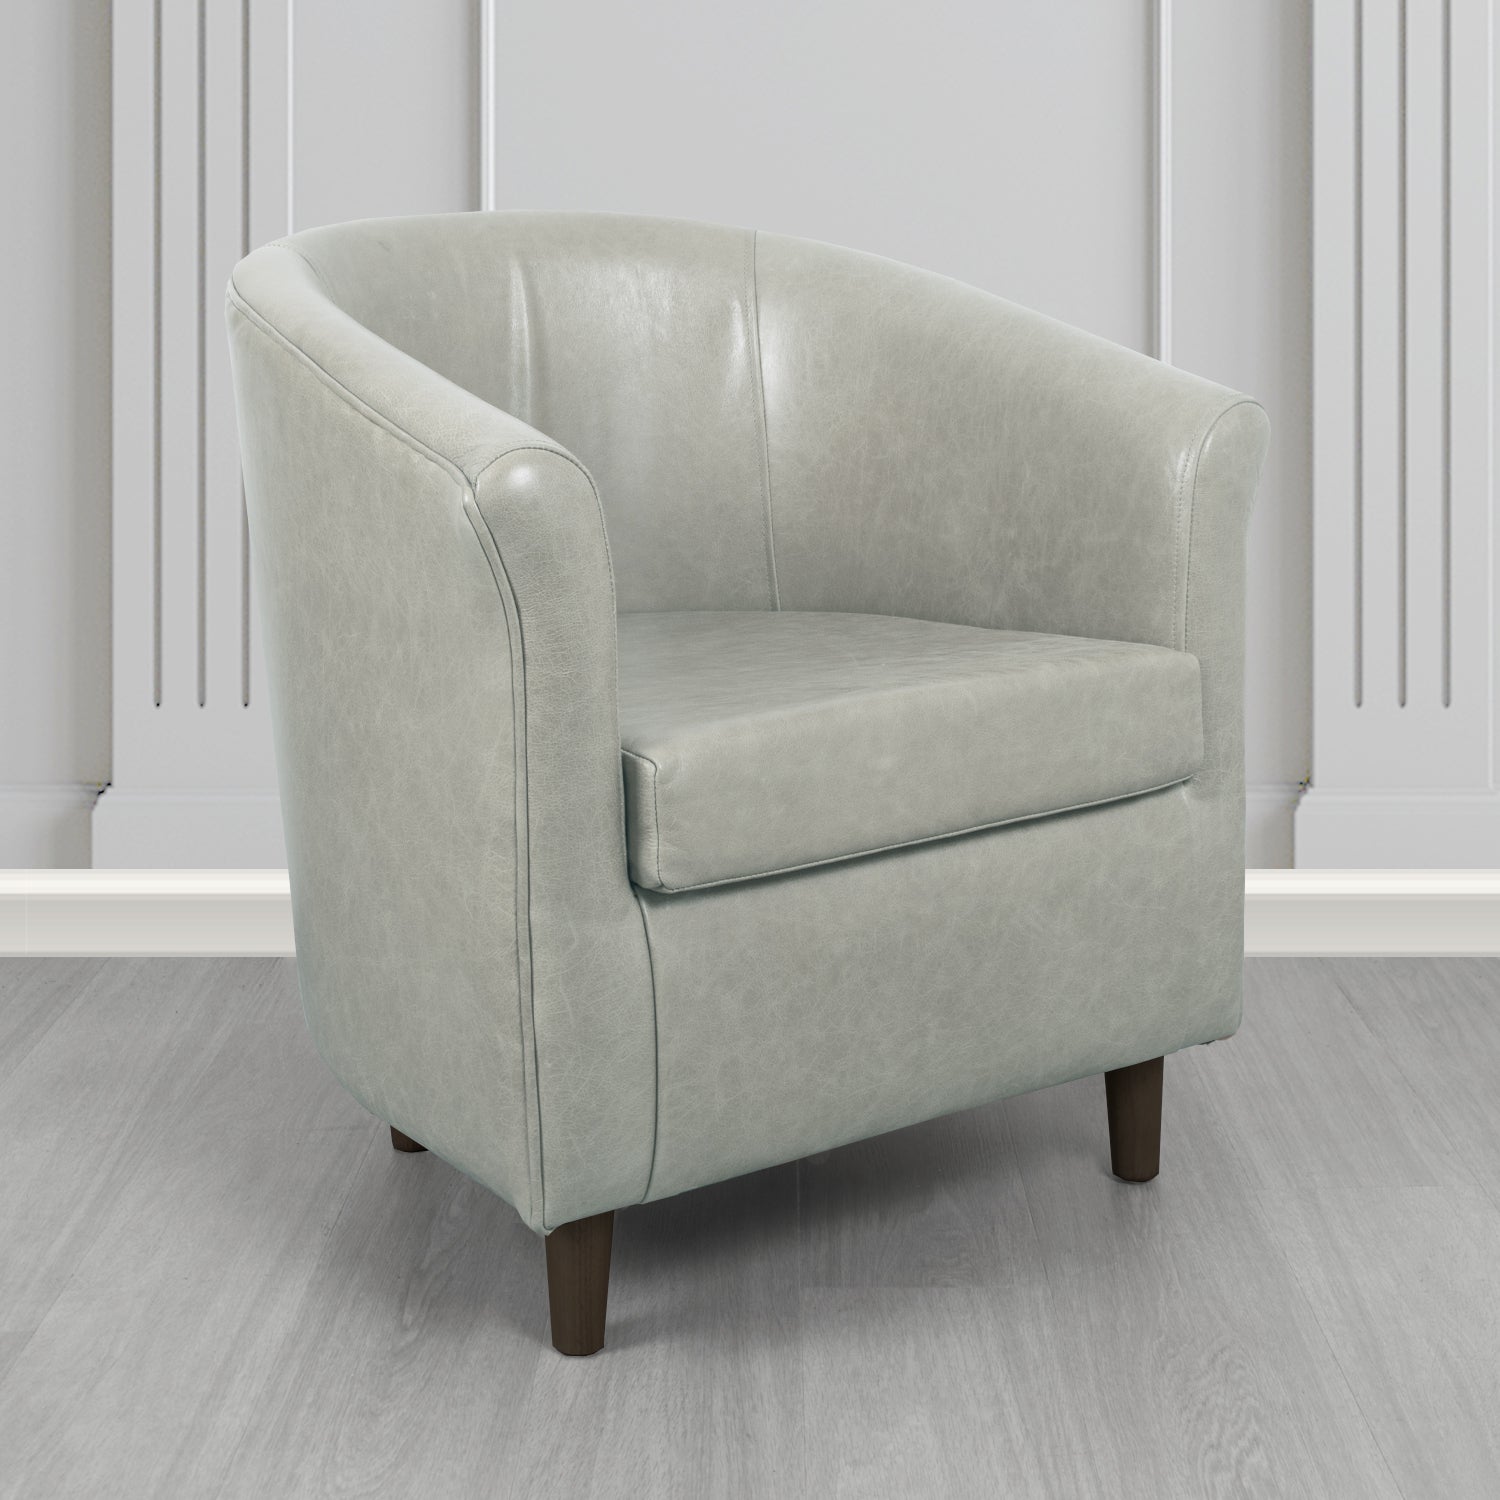 Tuscany Tub Chair in Crib 5 Old English Fossil Grey Genuine Leather - The Tub Chair Shop